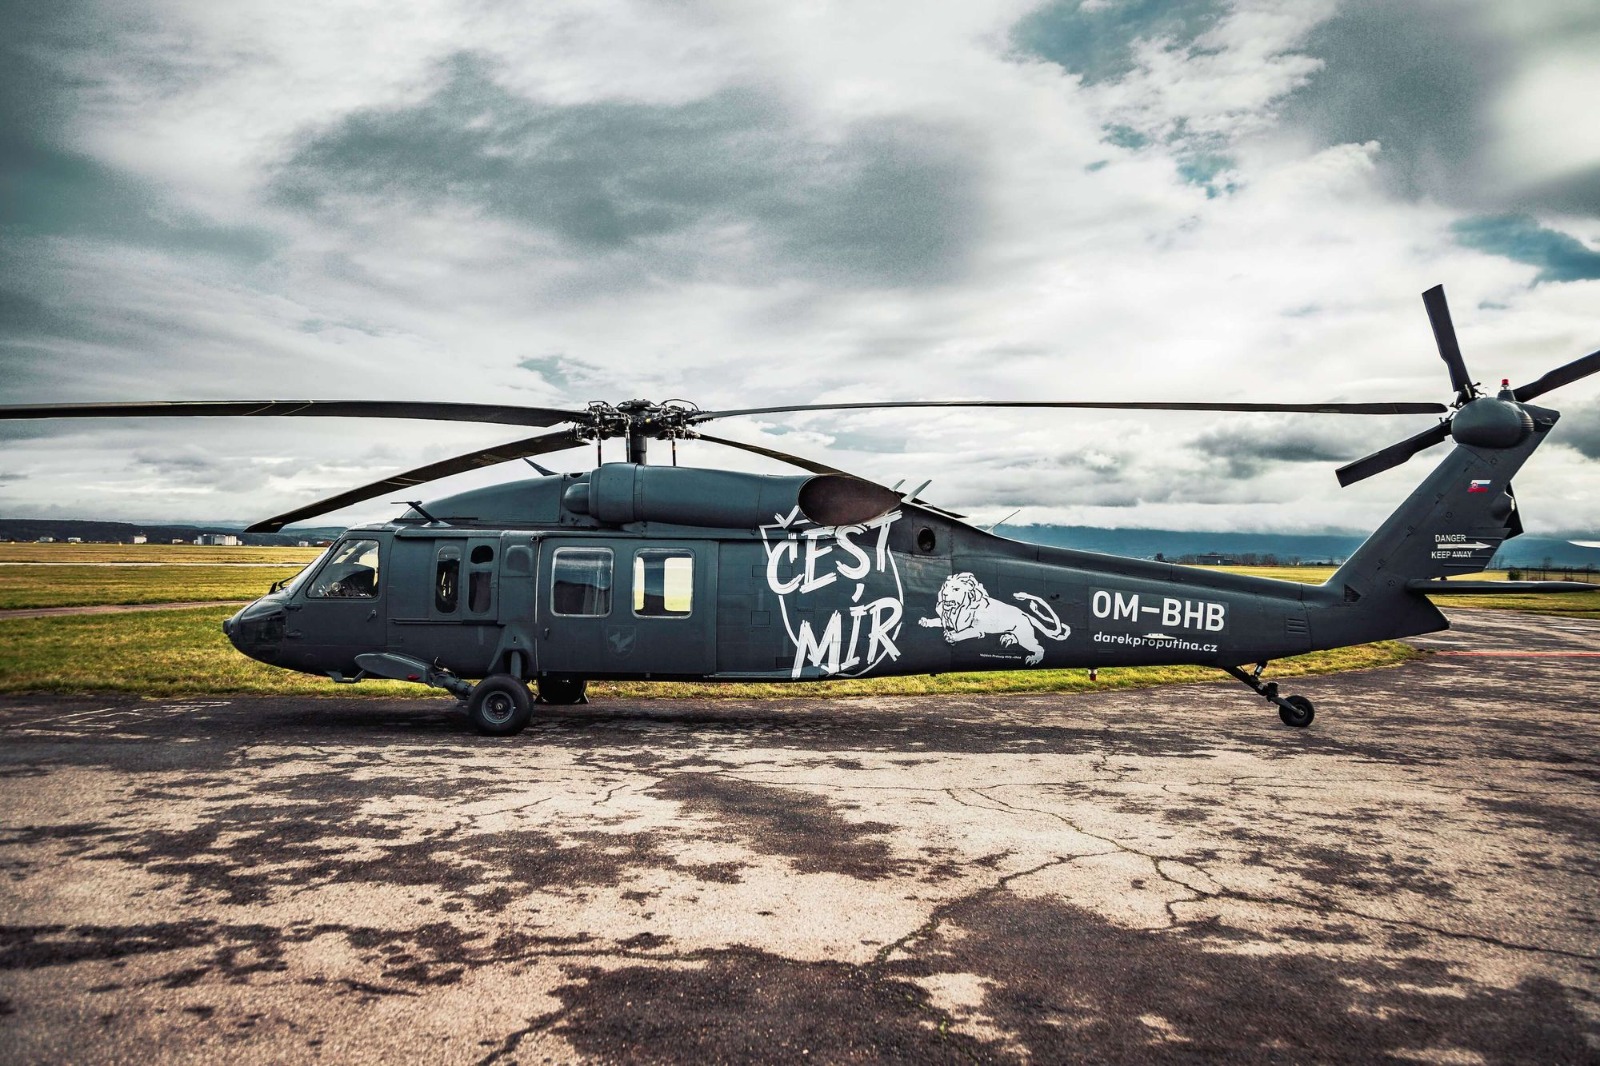 Czechs and Slovaks raised 400,000 euros in a week for a reconnaissance helicopter for  the Main Intelligence Directorate